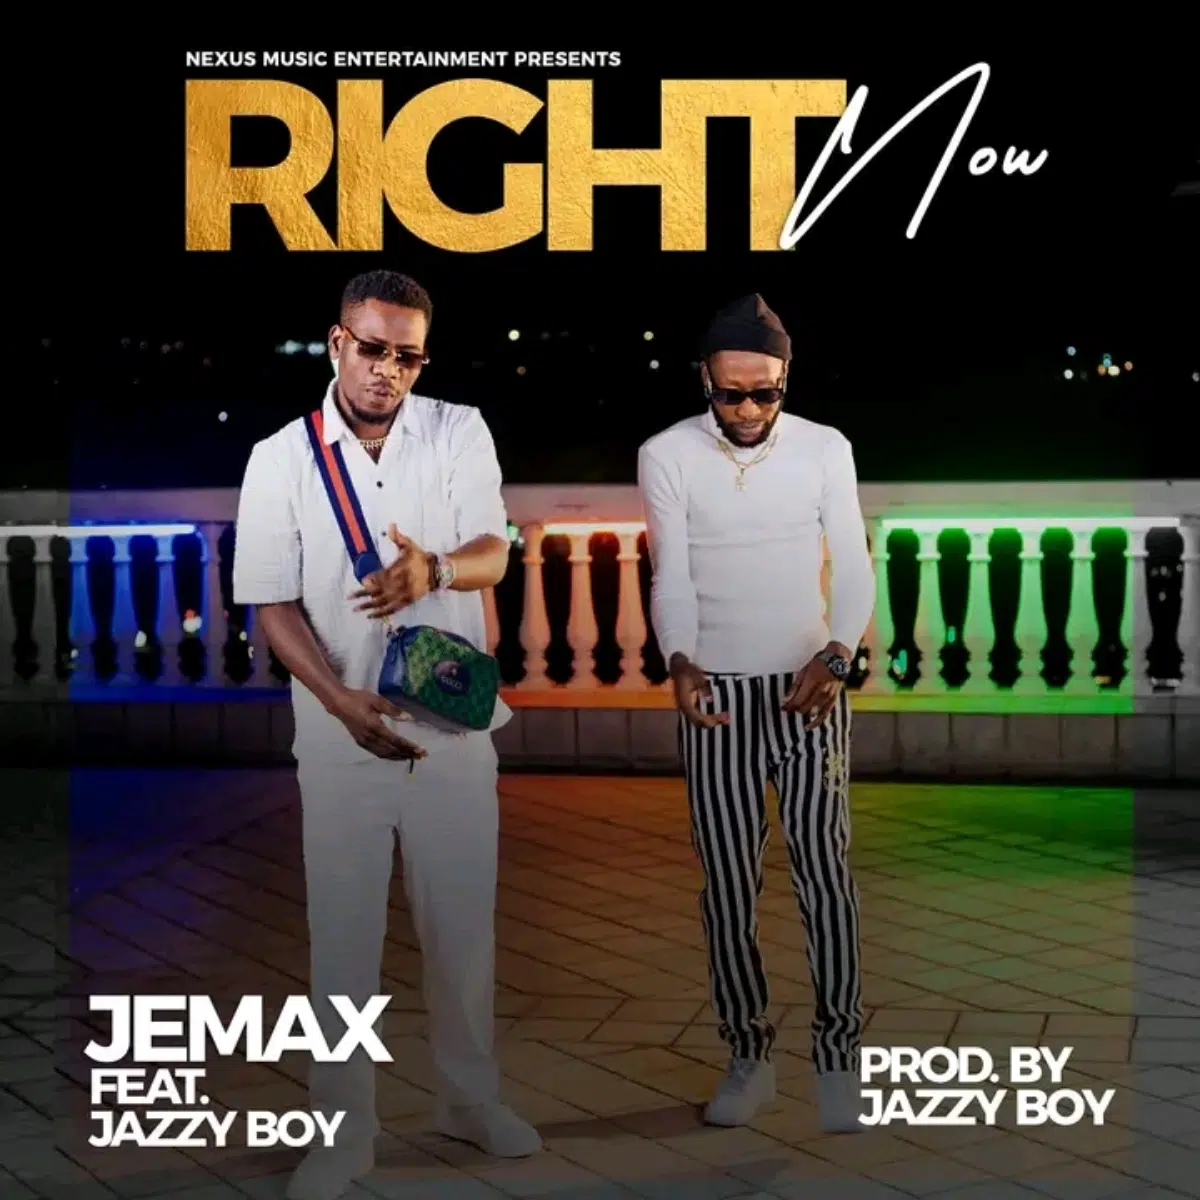 DOWNLOAD: Jemax Ft. Jazzy Boy – “Right Now” Mp3